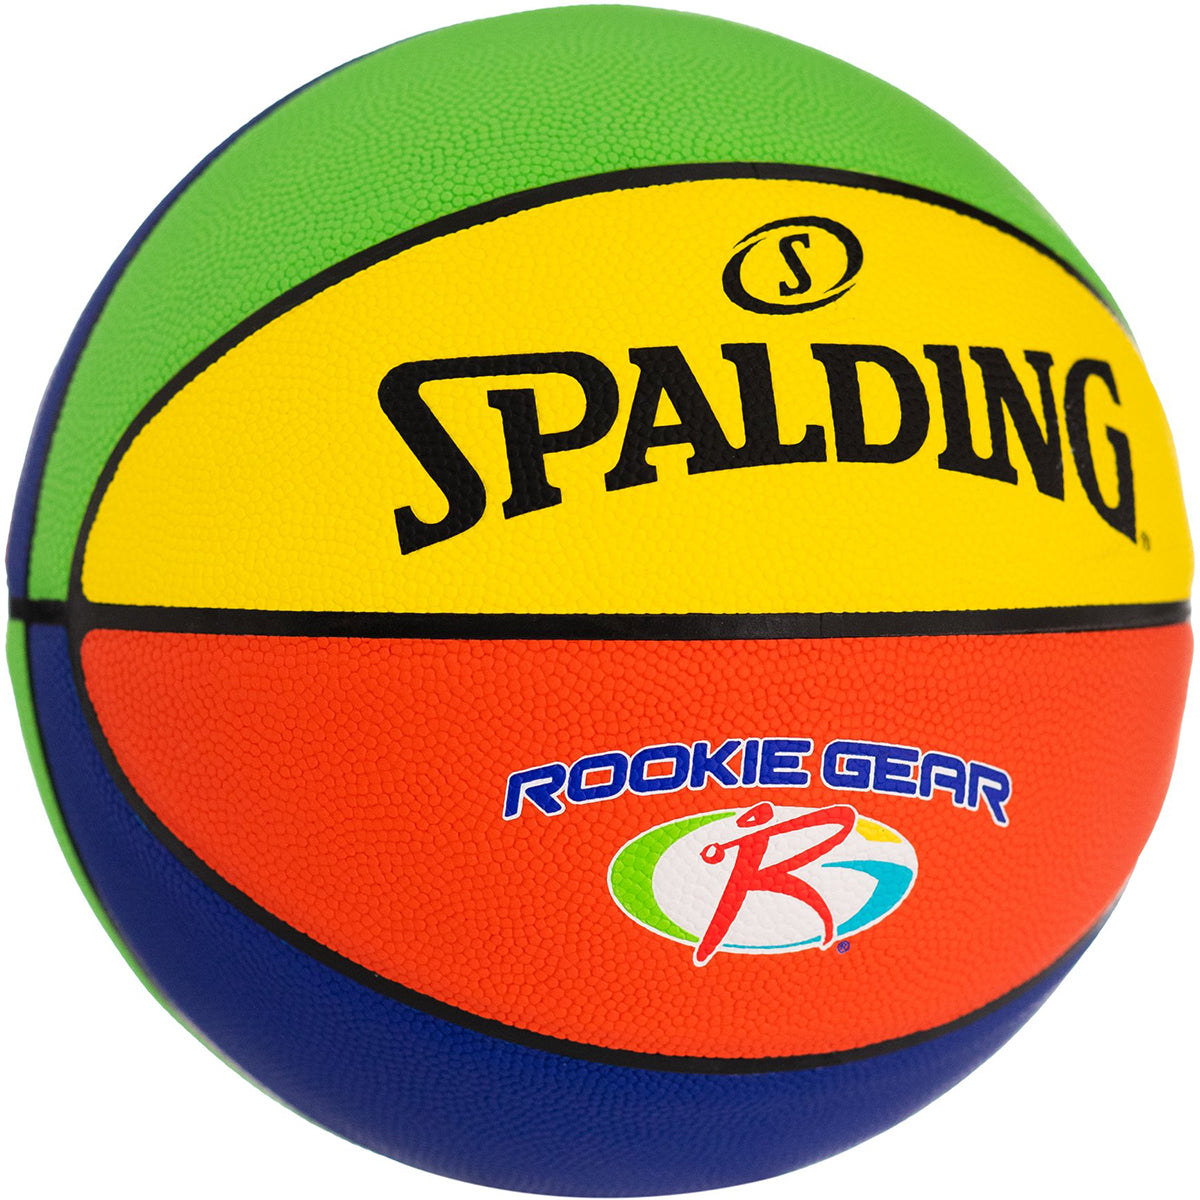 Spalding 27.5" Rookie Gear Youth Indoor/Outdoor Basketball Spalding